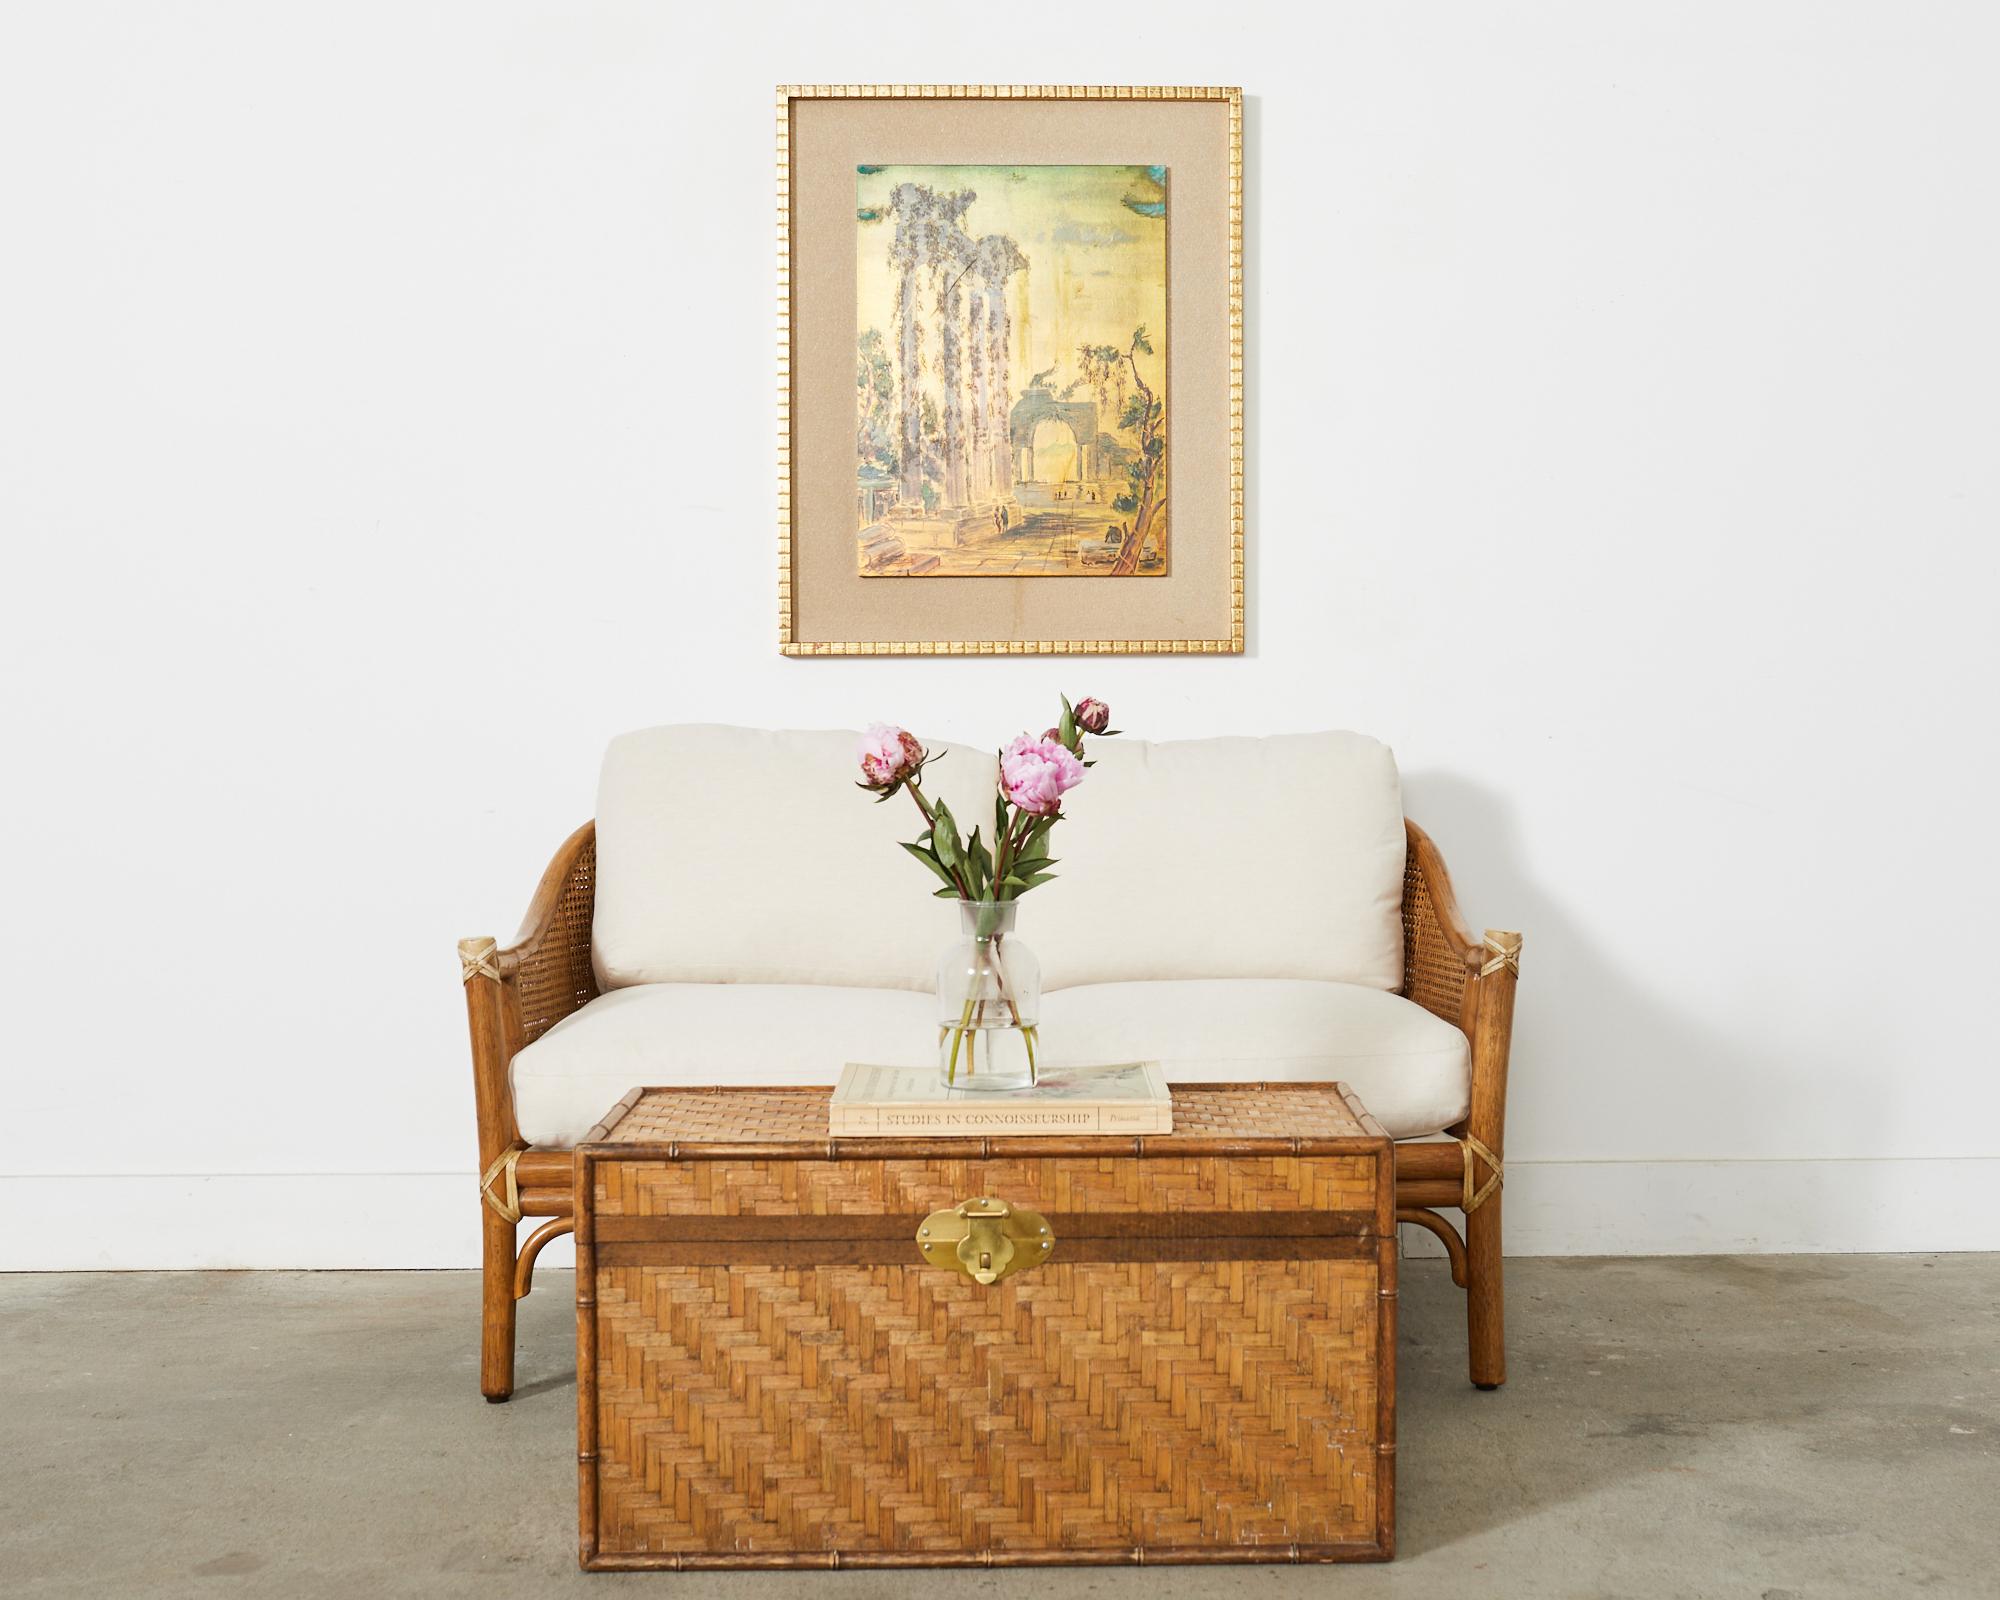 Genuine McGuire sofa settee or loveseat made in the California coastal organic modern style by McGuire. The settee features a thick rattan pole frame with double caned sides and back. The exposed joints are lashed together with leather rawhide laces